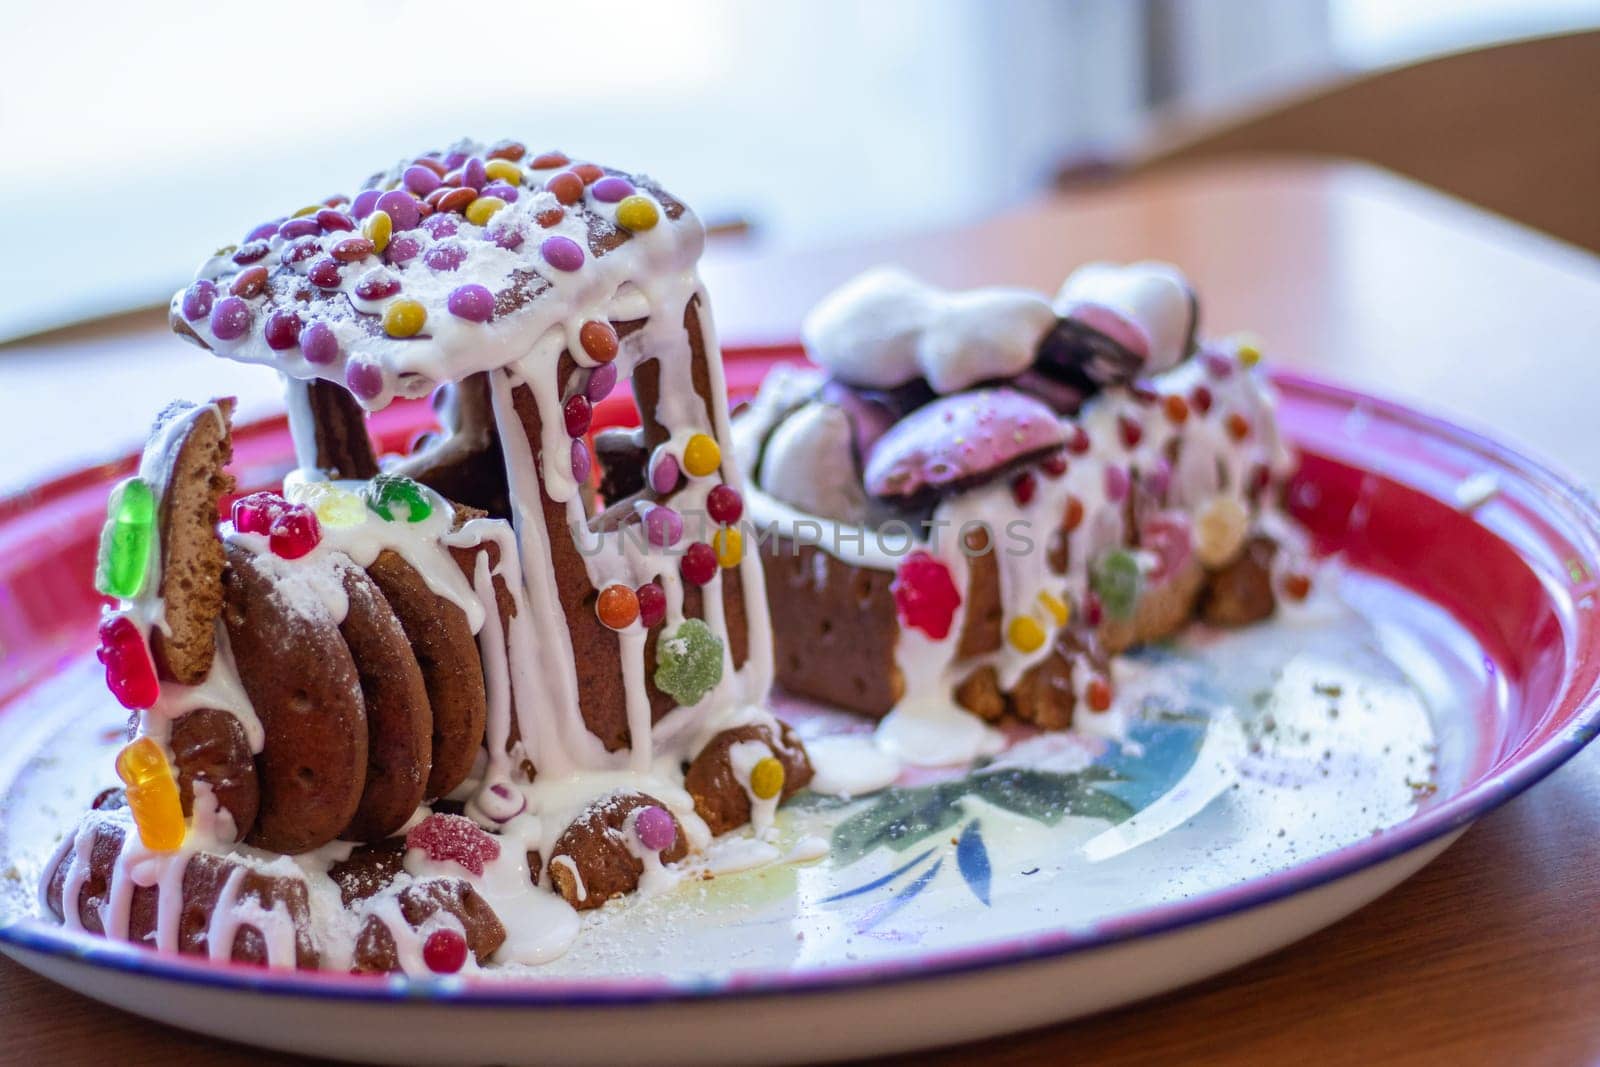 homemade gingerbread train decorated with candies and marmalade on colored tray by Leoschka